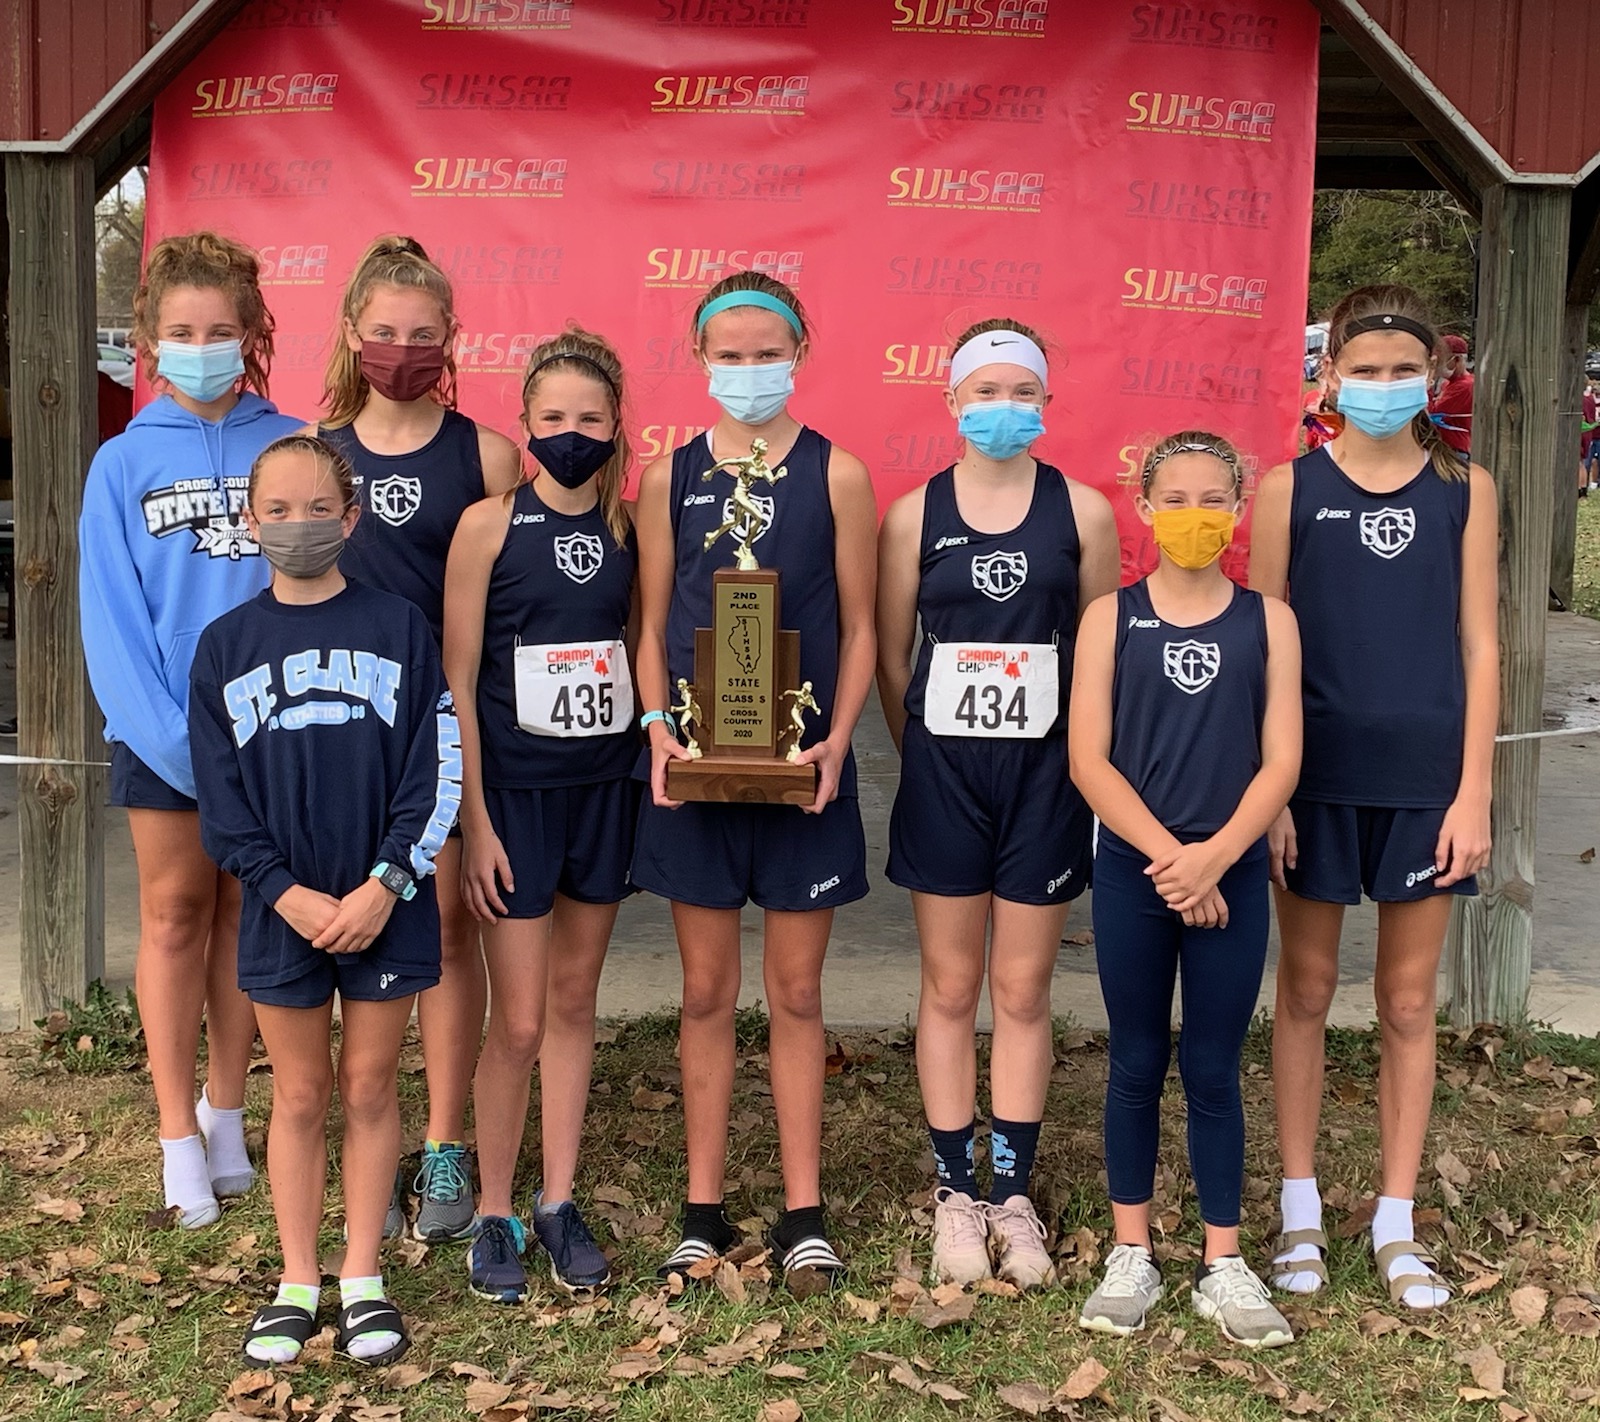 2020 Class S Girls 2nd Place St. Clare